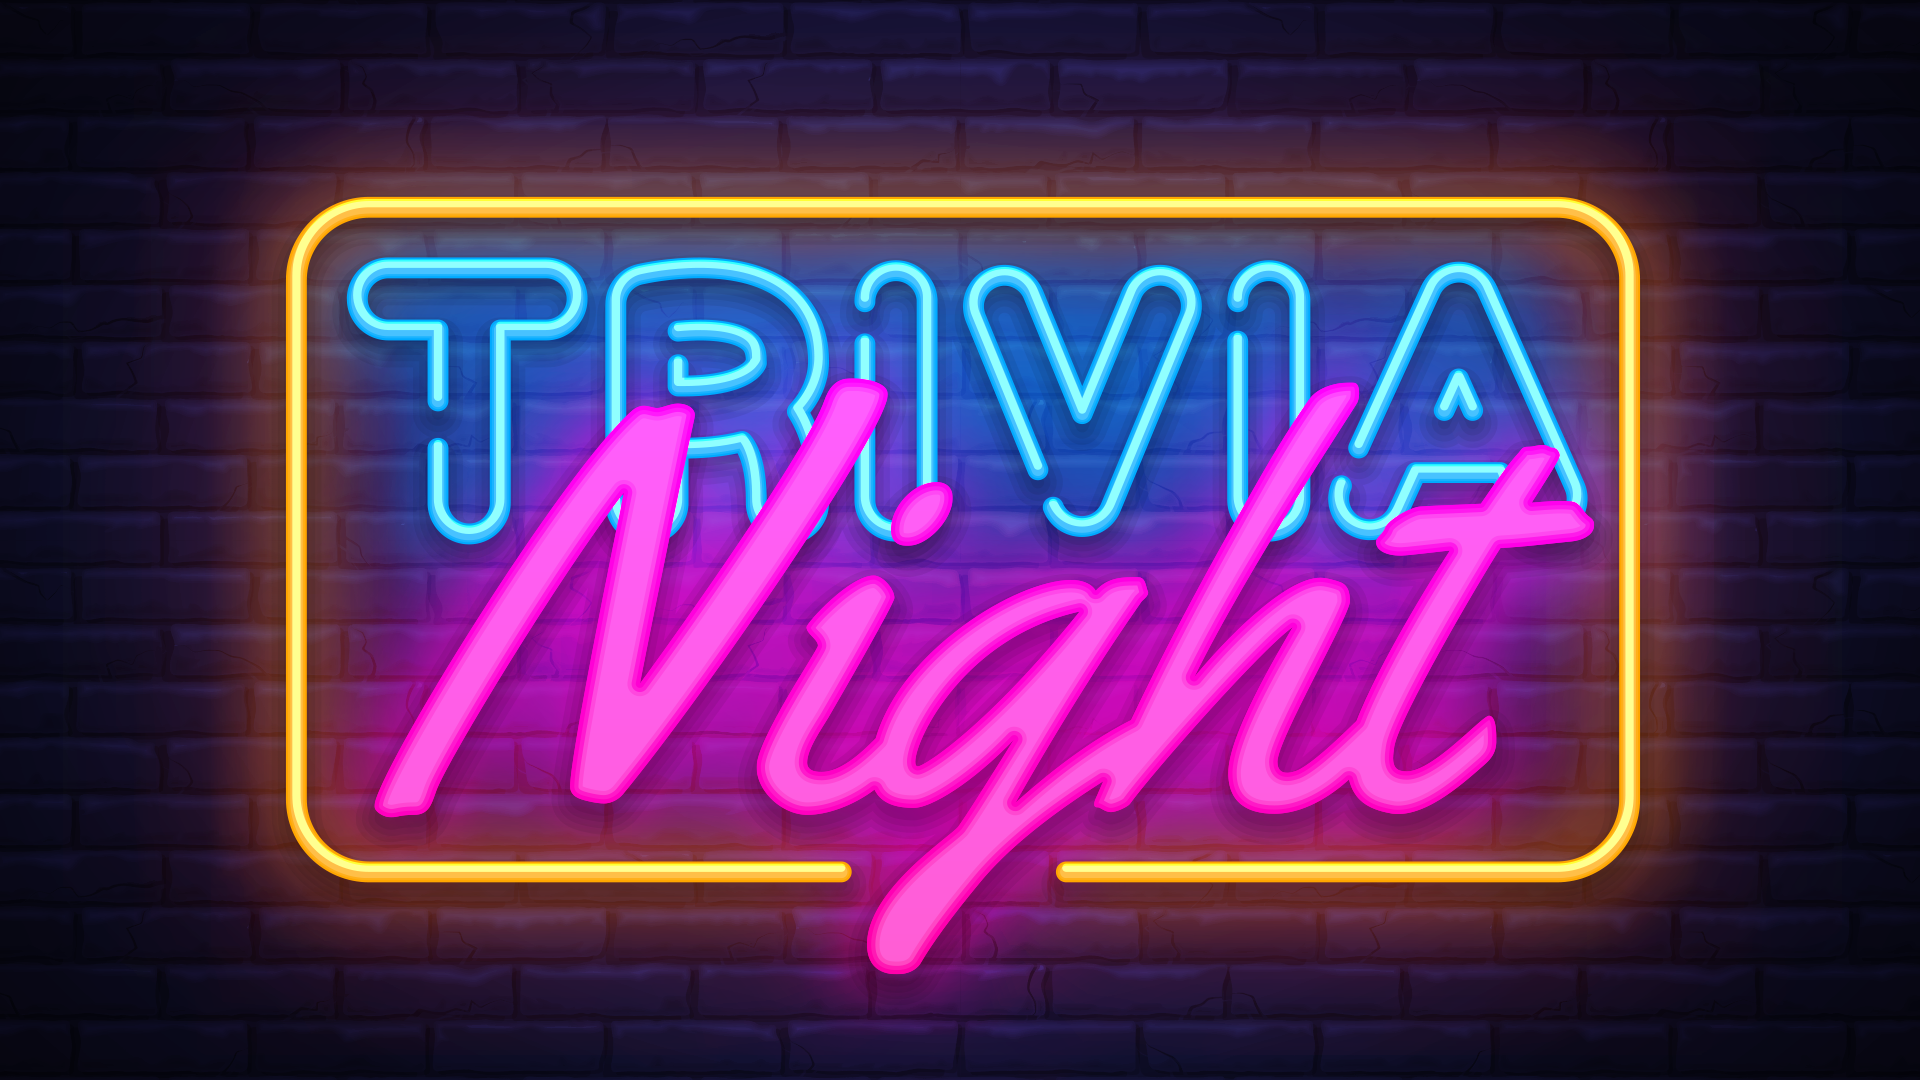 Speed Up Your Restaurant's Slow Nights with Bar Trivia Night Events